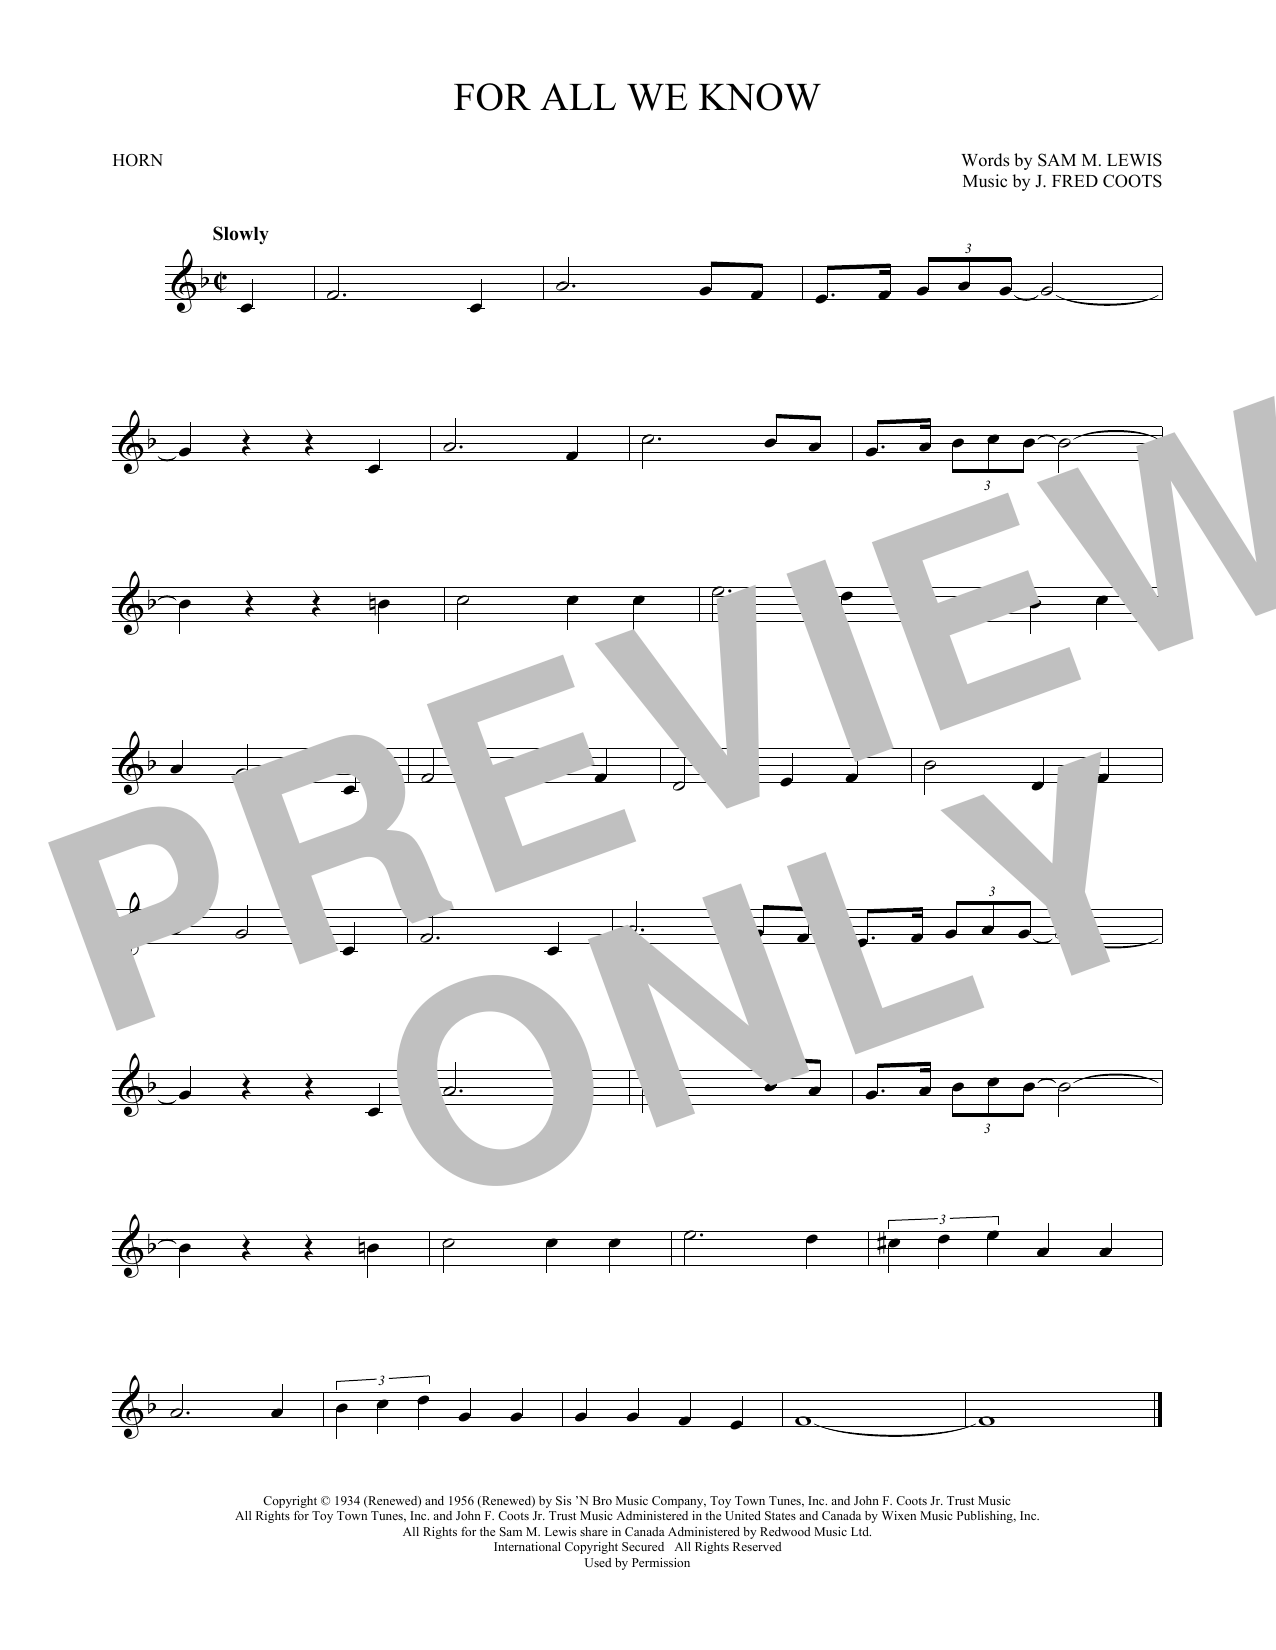 For All We Know (French Horn Solo) von J. Fred Coots